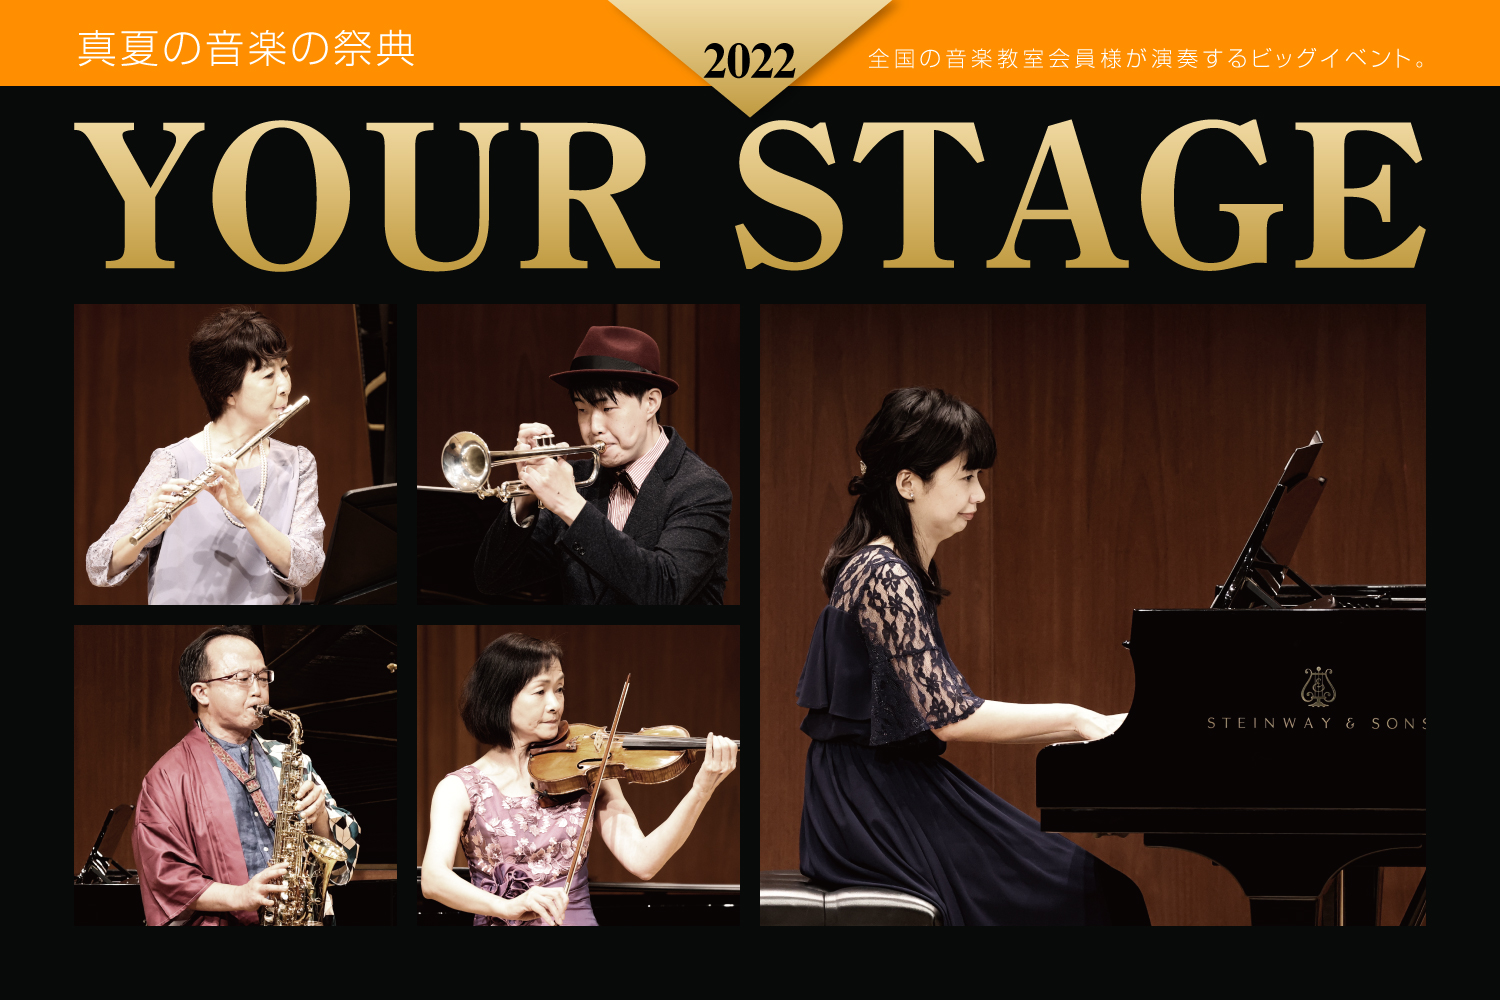 YOUR STAGE in大阪チケット発売開始しております！